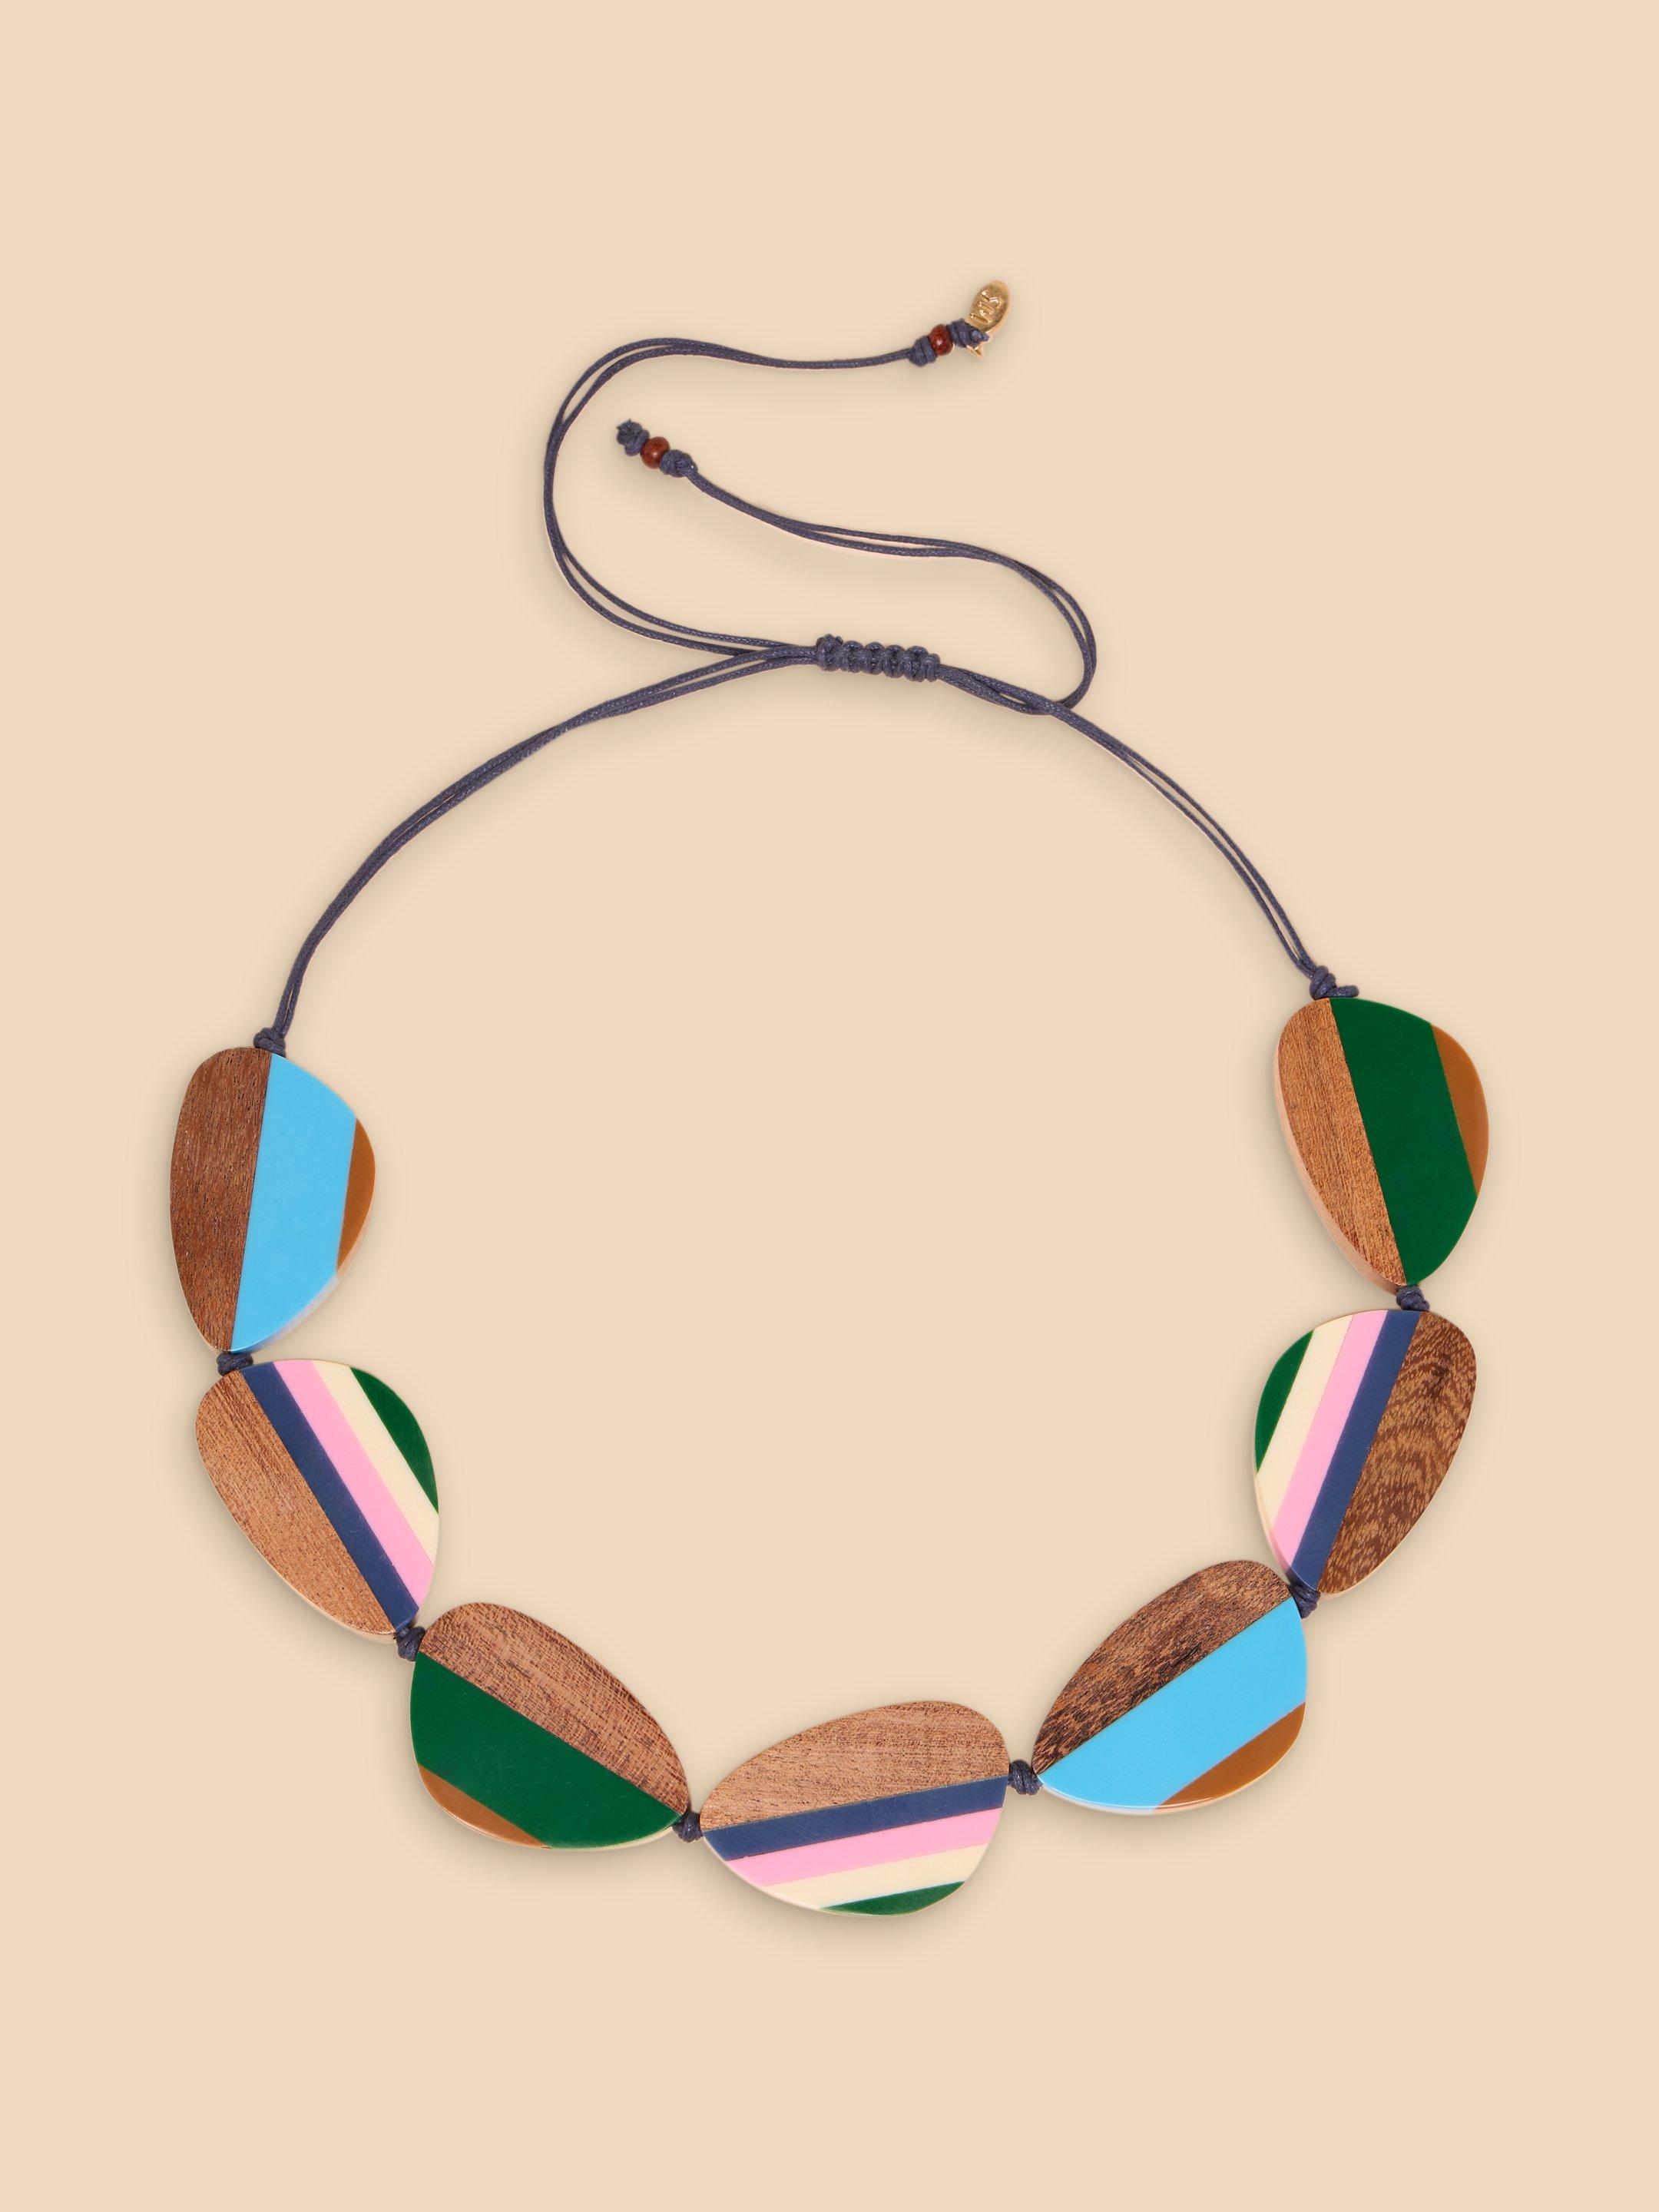 Kari Resin Wood Necklace in GREEN MLT - LIFESTYLE